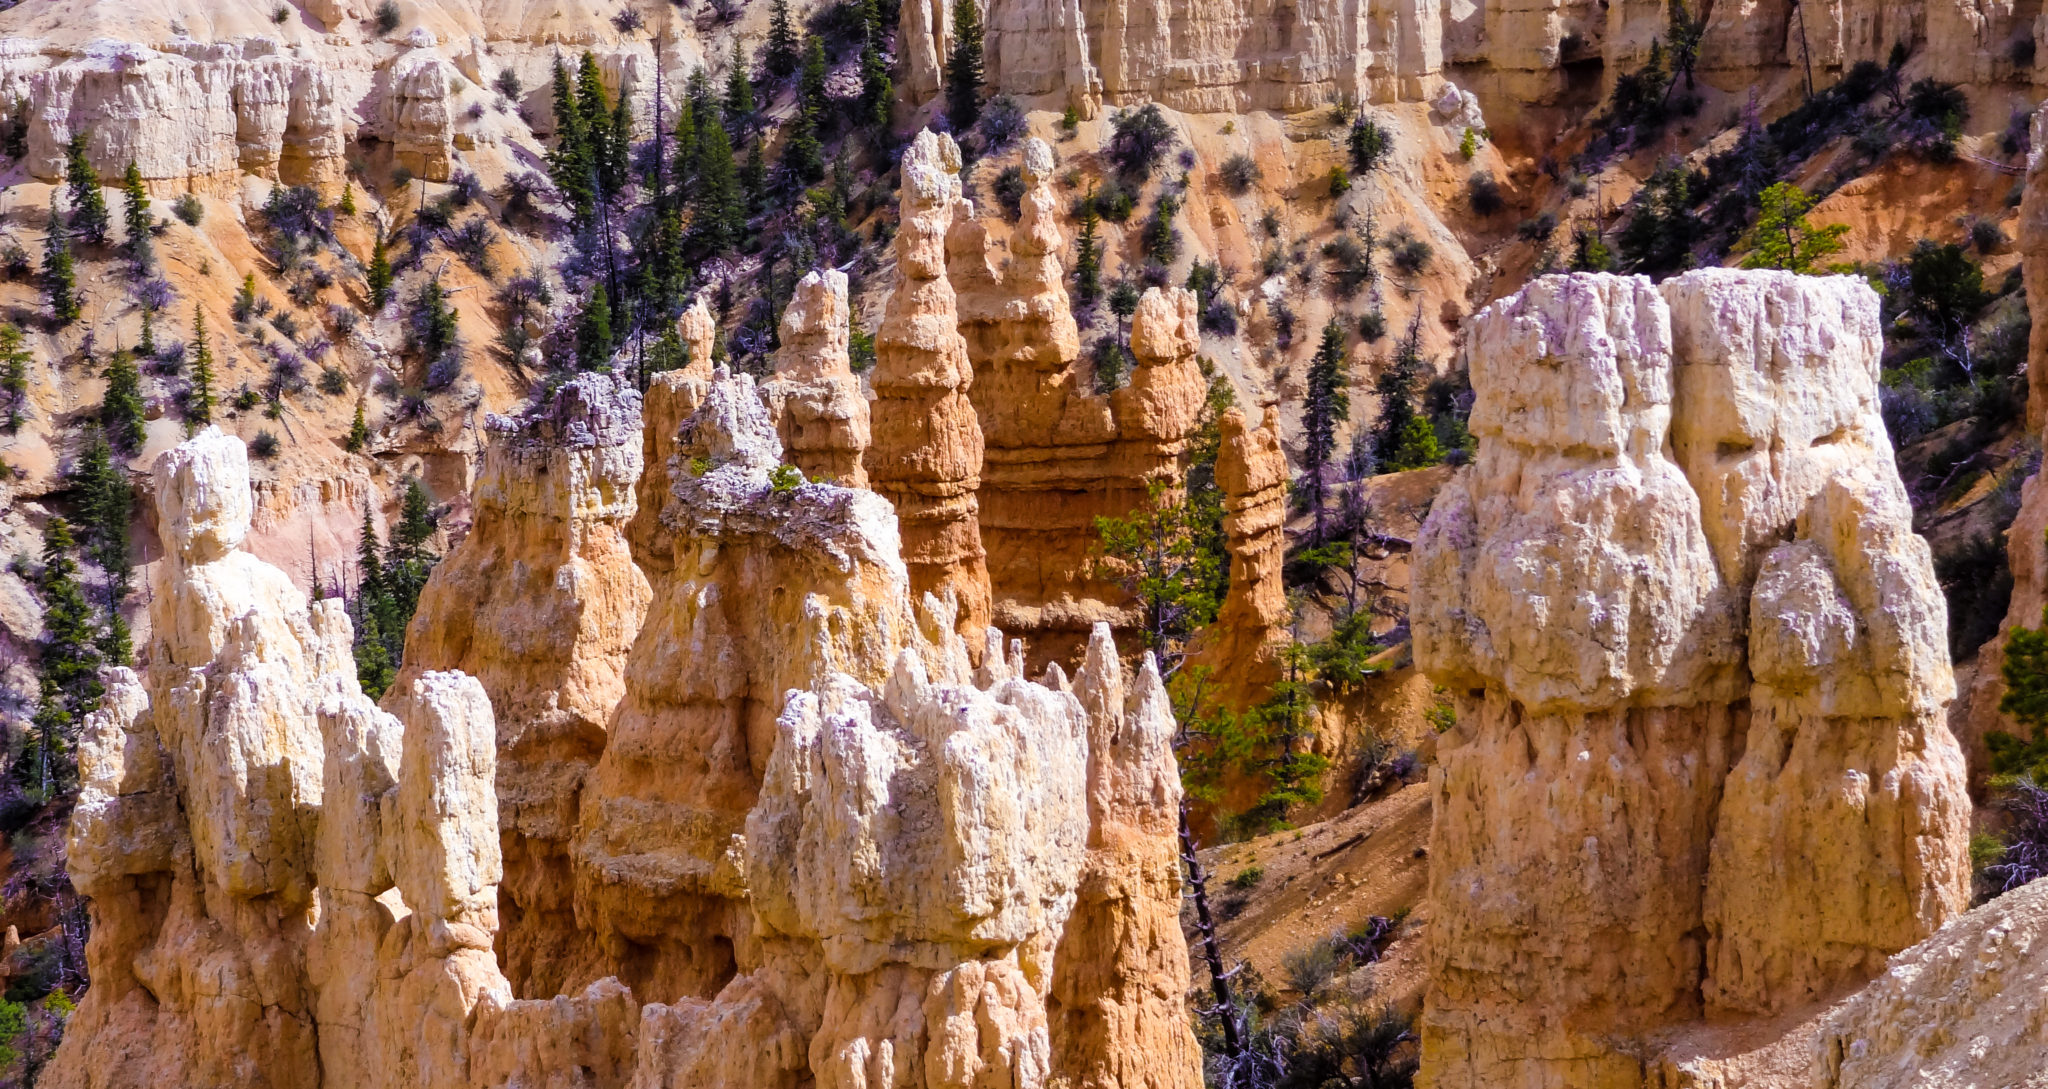 Fairyland at Bryce Canyon National Park was one of my favorite lookouts on the Rainbow Point Shuttle Tour.